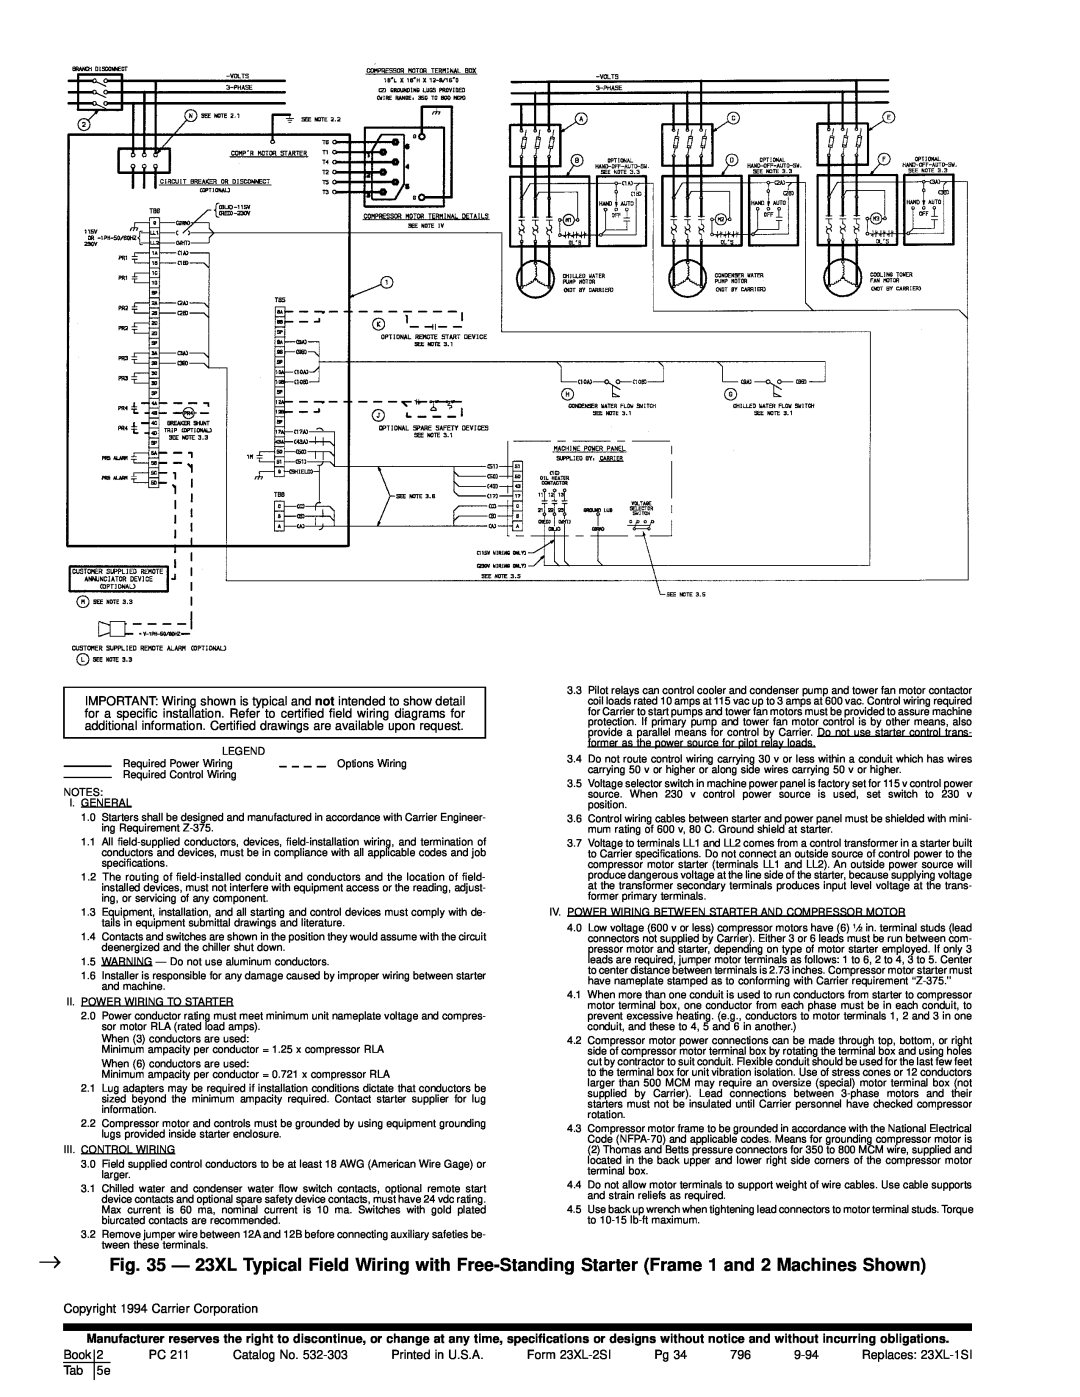 Carrier 23 XL installation instructions Copyright 1994 Carrier Corporation 